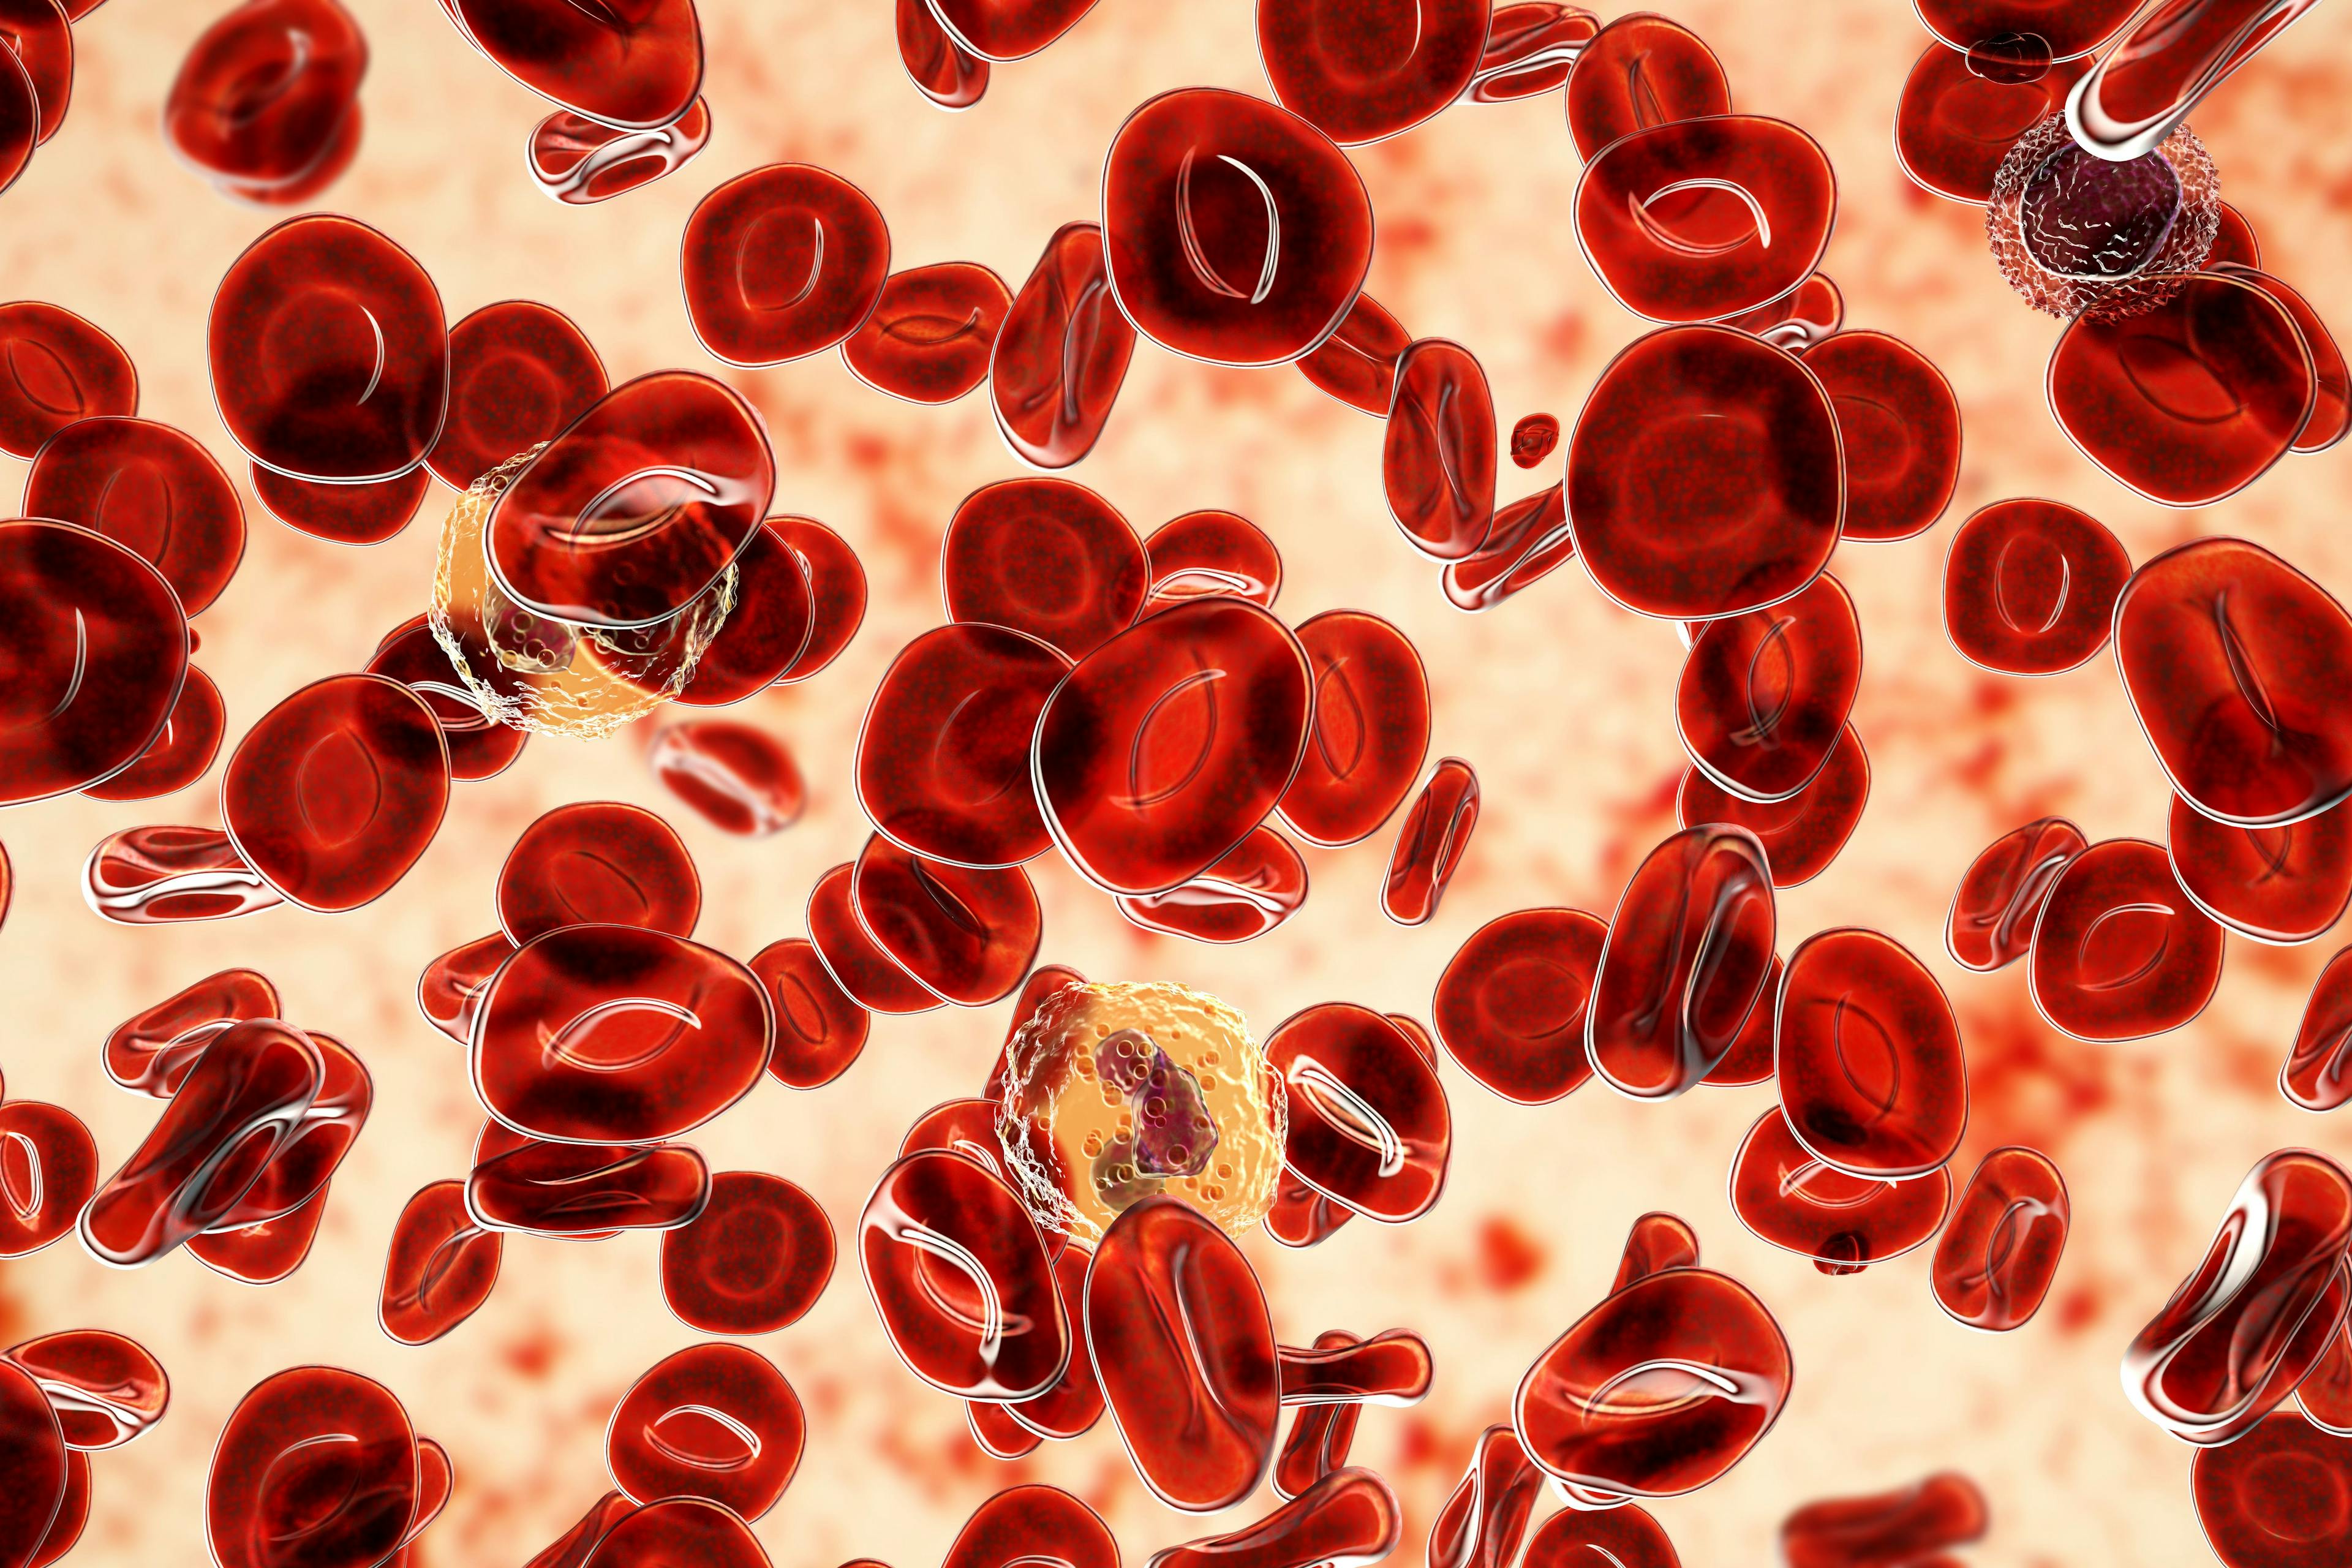 Polycythemia vera is one of the diseases categorized as myeloproliferative neoplasms.

Image credit: Dr_Microbe - stock.adobe.com